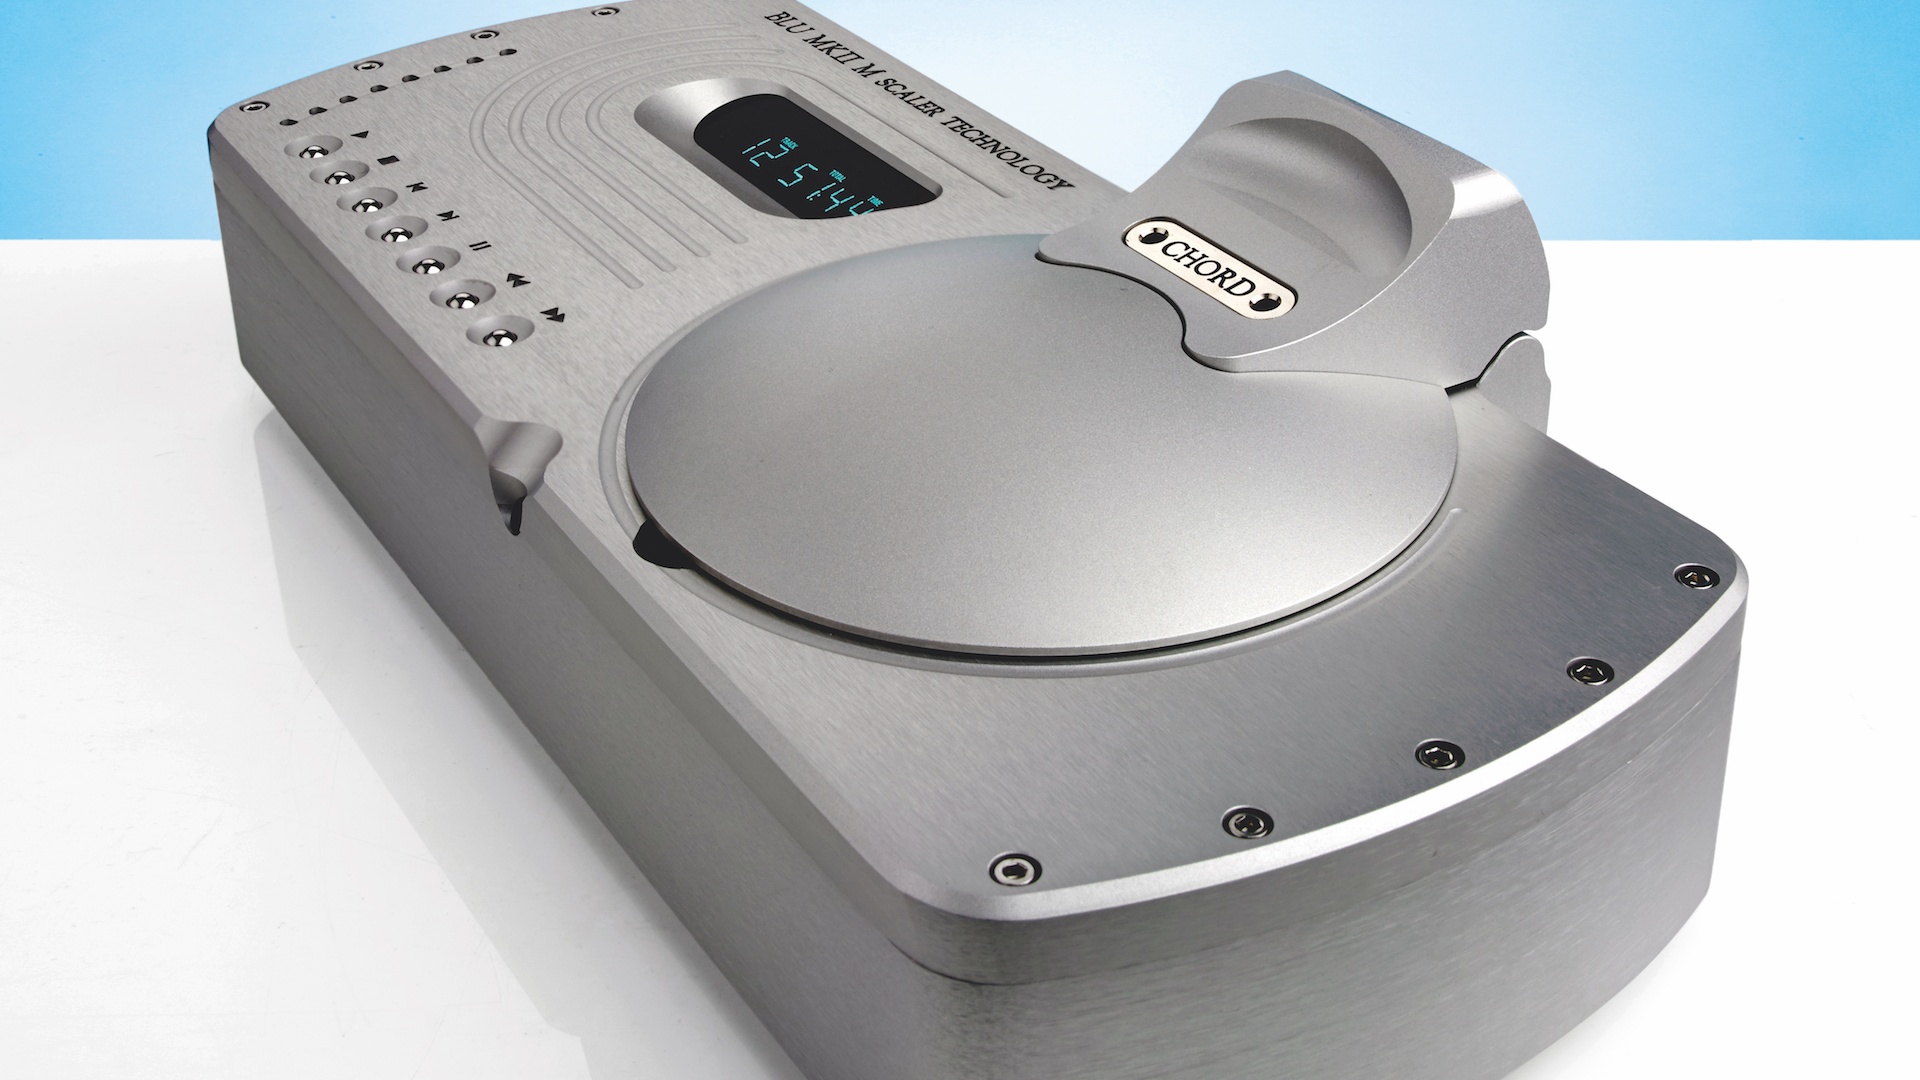 Professor Vooravond ketting 13 of the best British CD players of all time | What Hi-Fi?